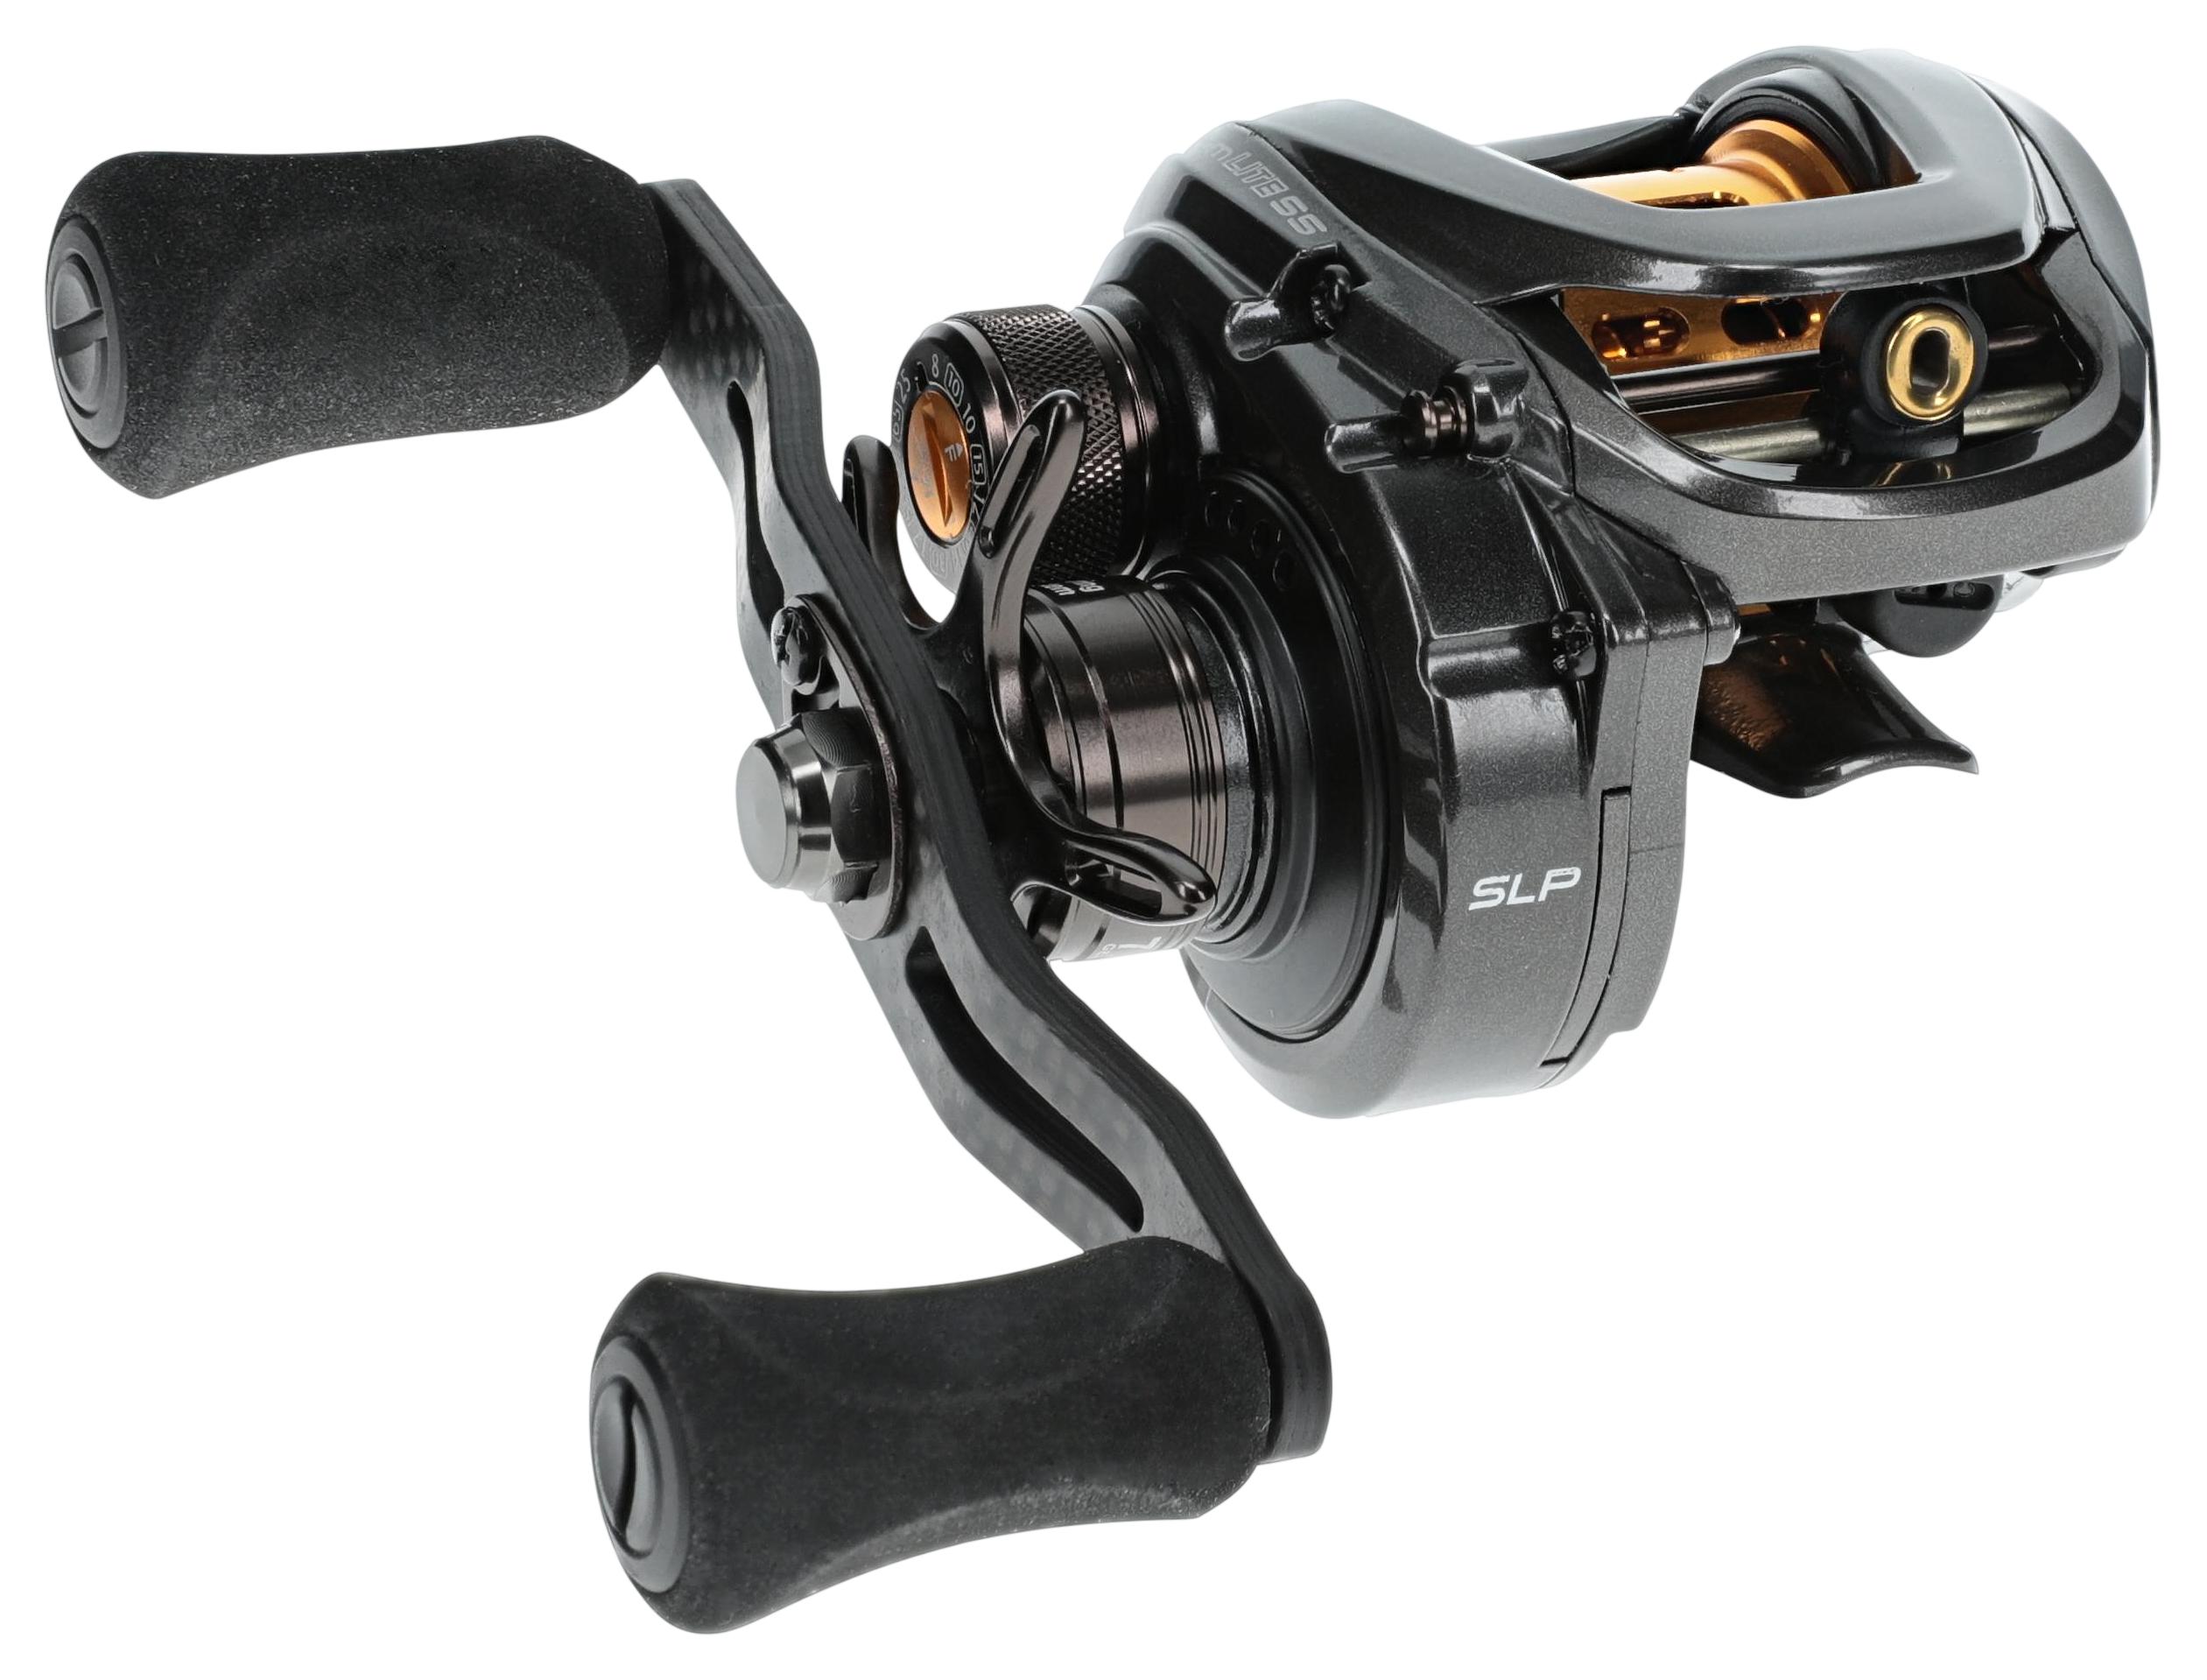 Luzkey Baitcasting Reel - Low Profile Baitcaster Fishing Reel, Compact 17.6 Drag, 12 Left Handed Other